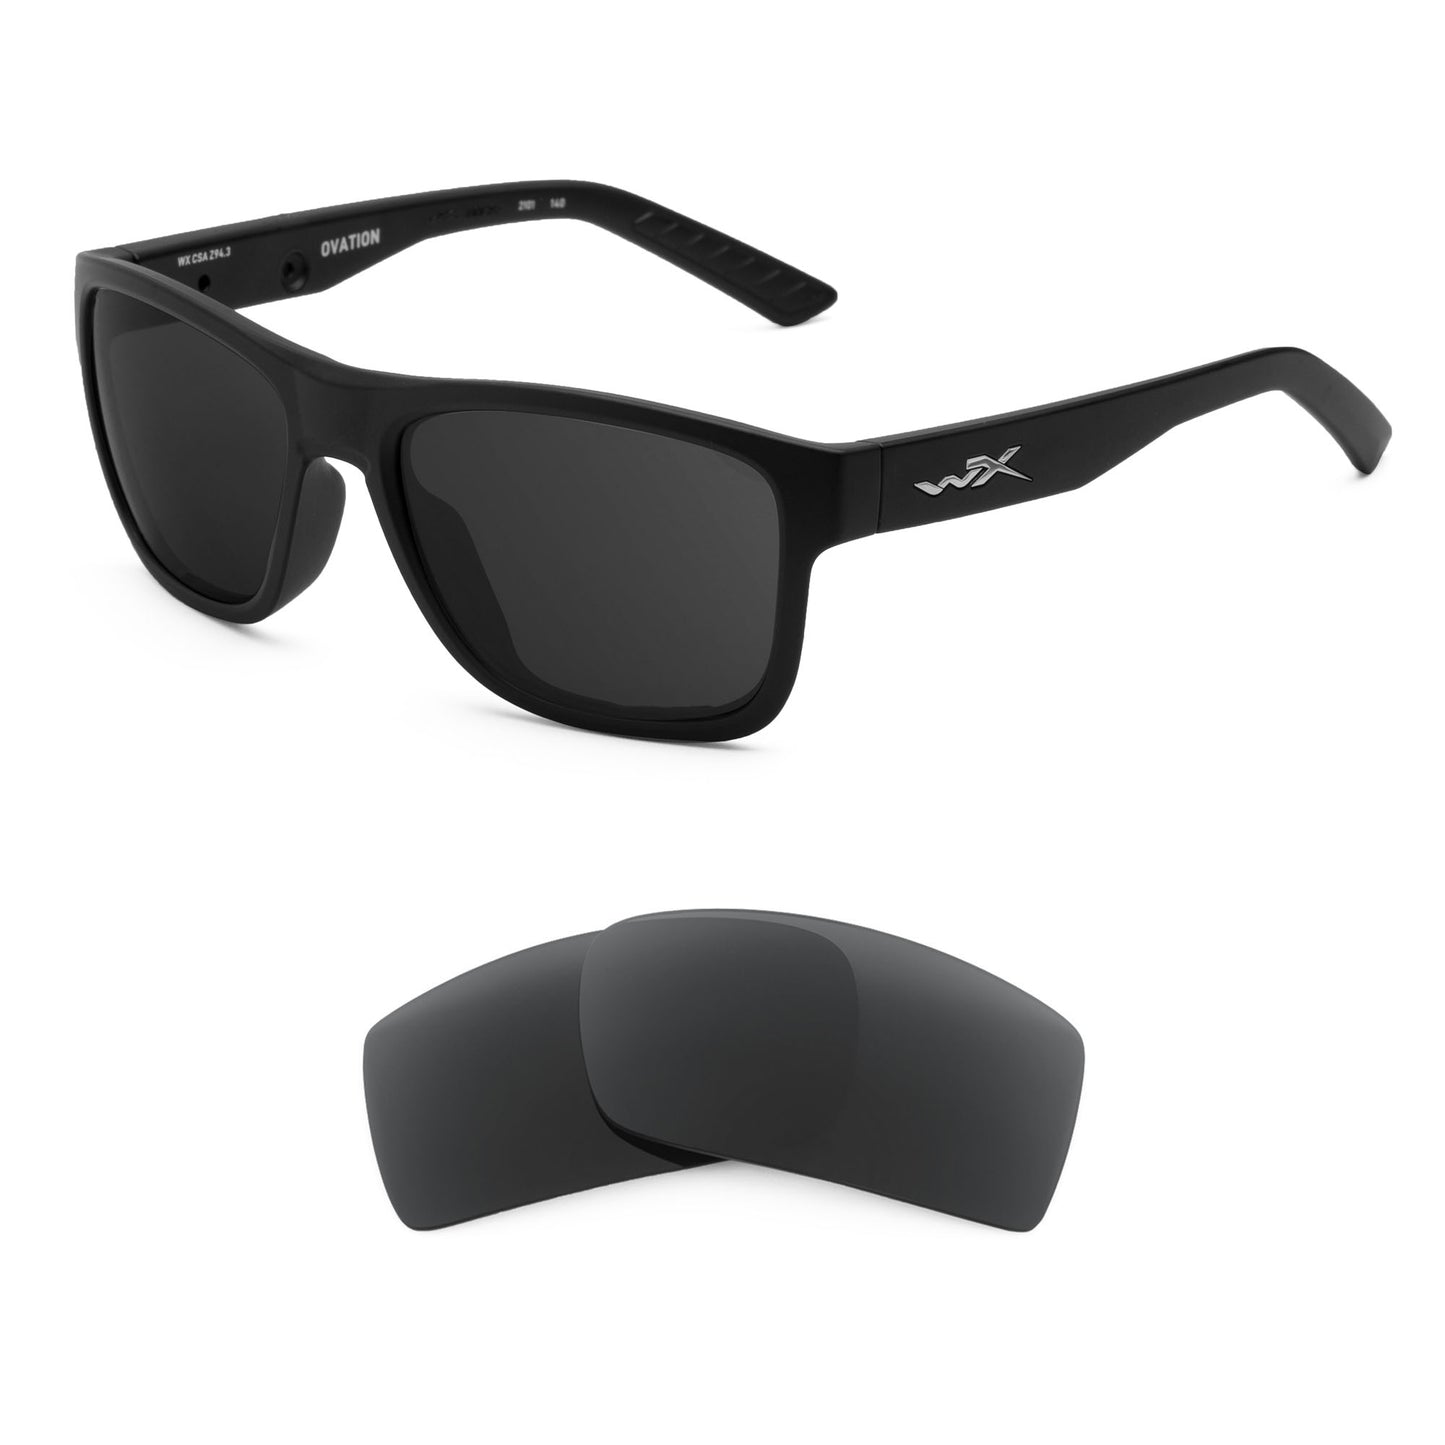 Wiley X Ovation sunglasses with replacement lenses